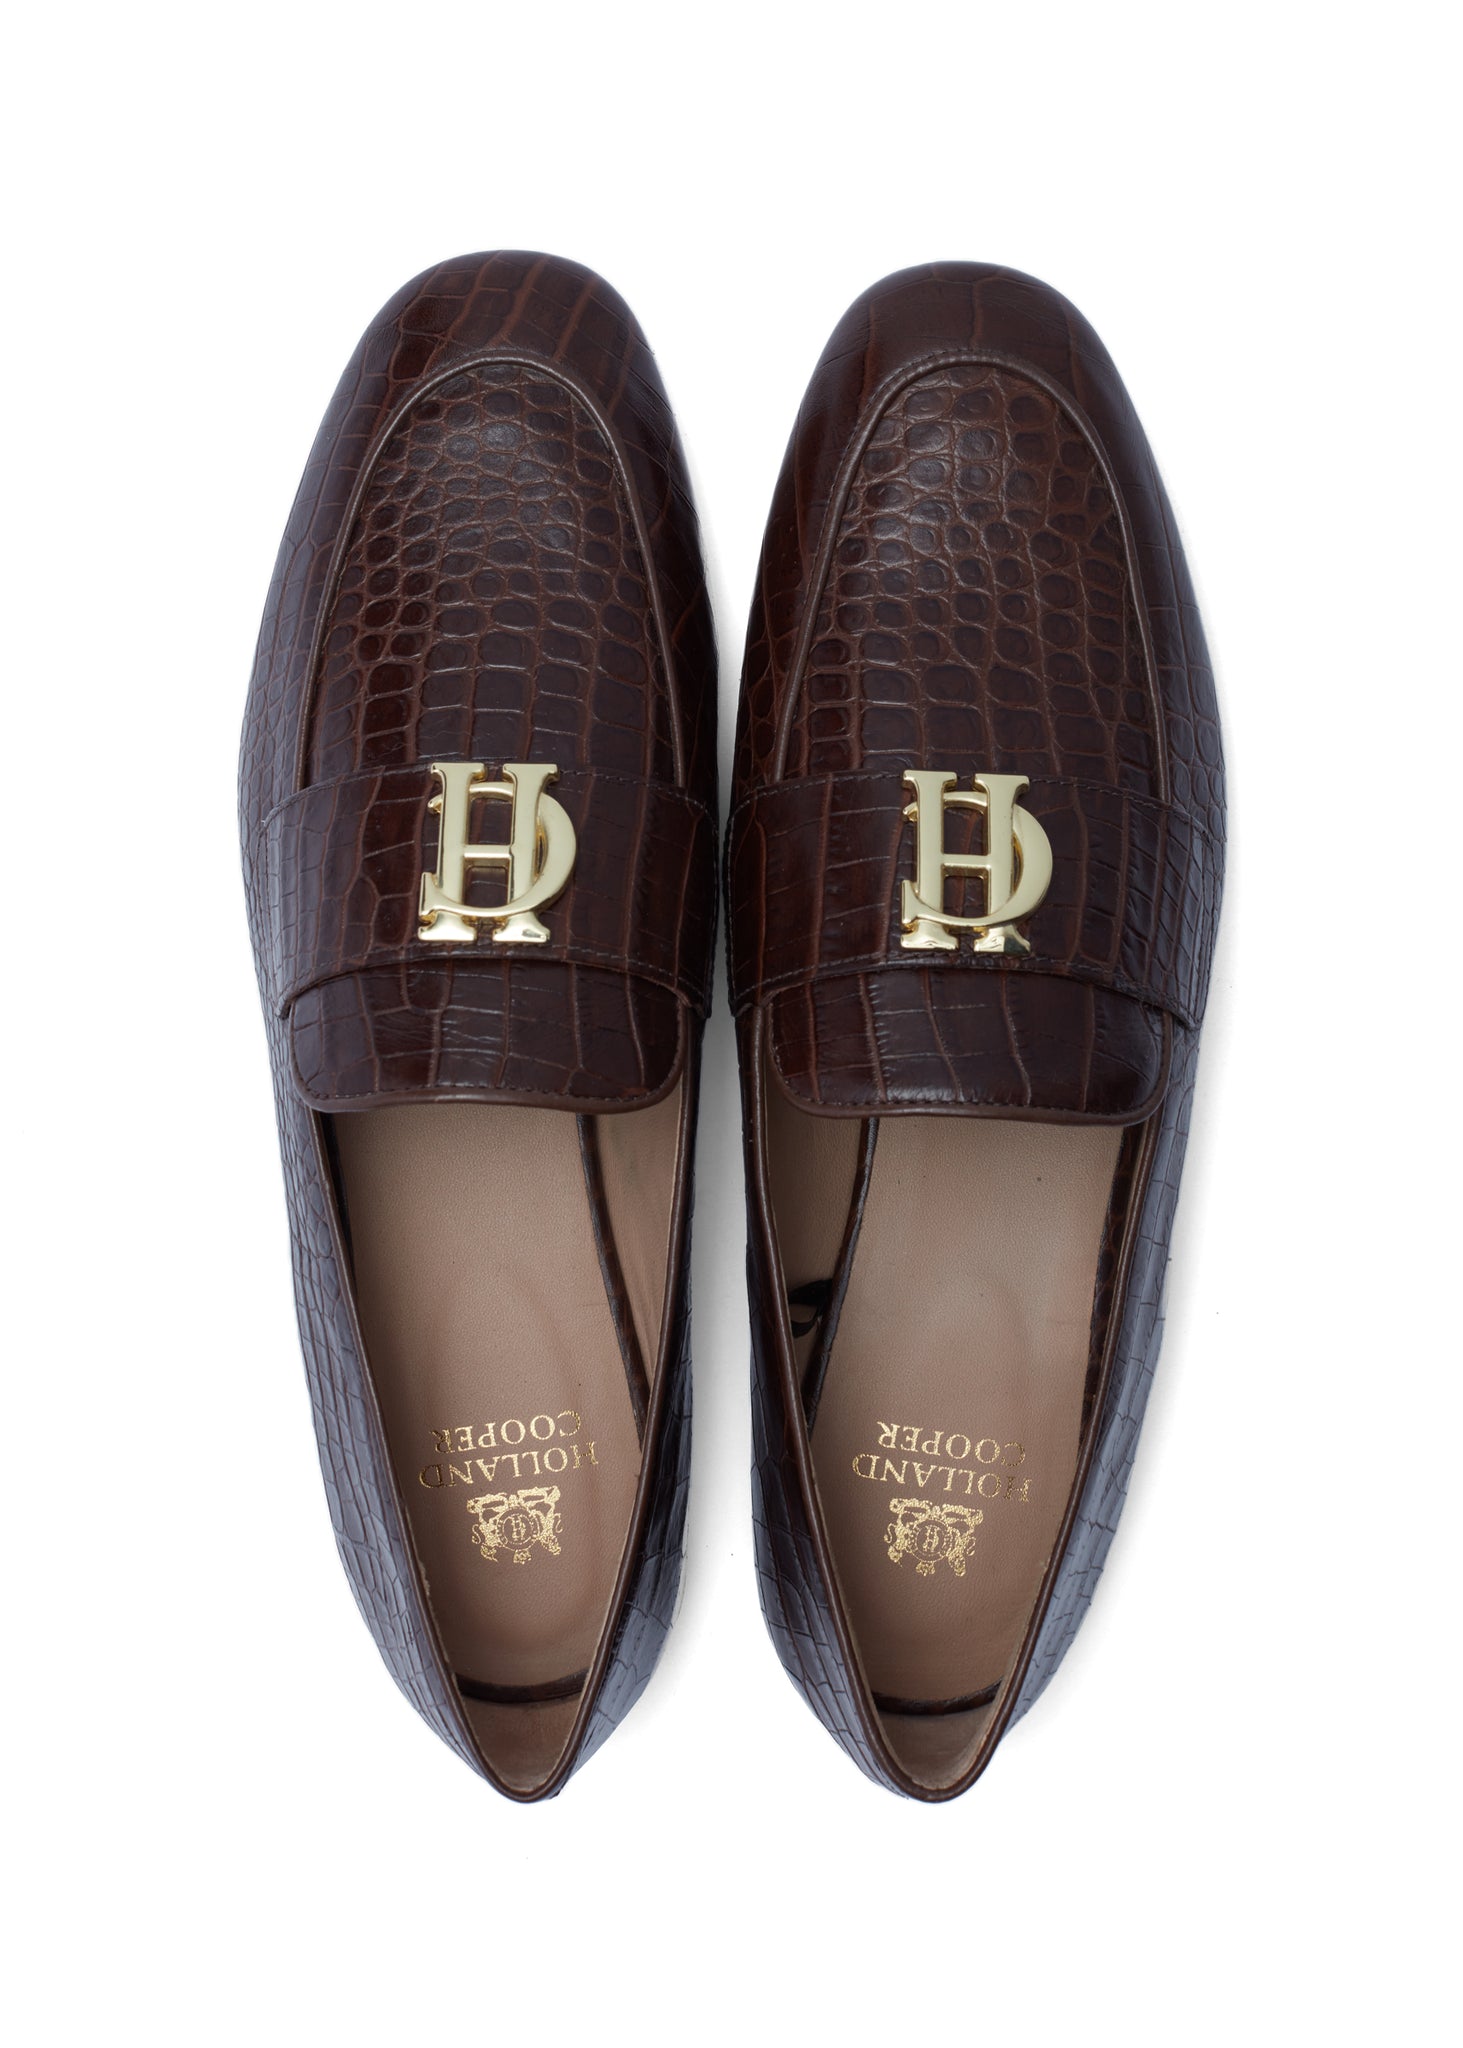 birds eye view of brown croc embossed leather loafers with a slightly pointed toe and gold hardware to the top and gold foil branding on the inner sole